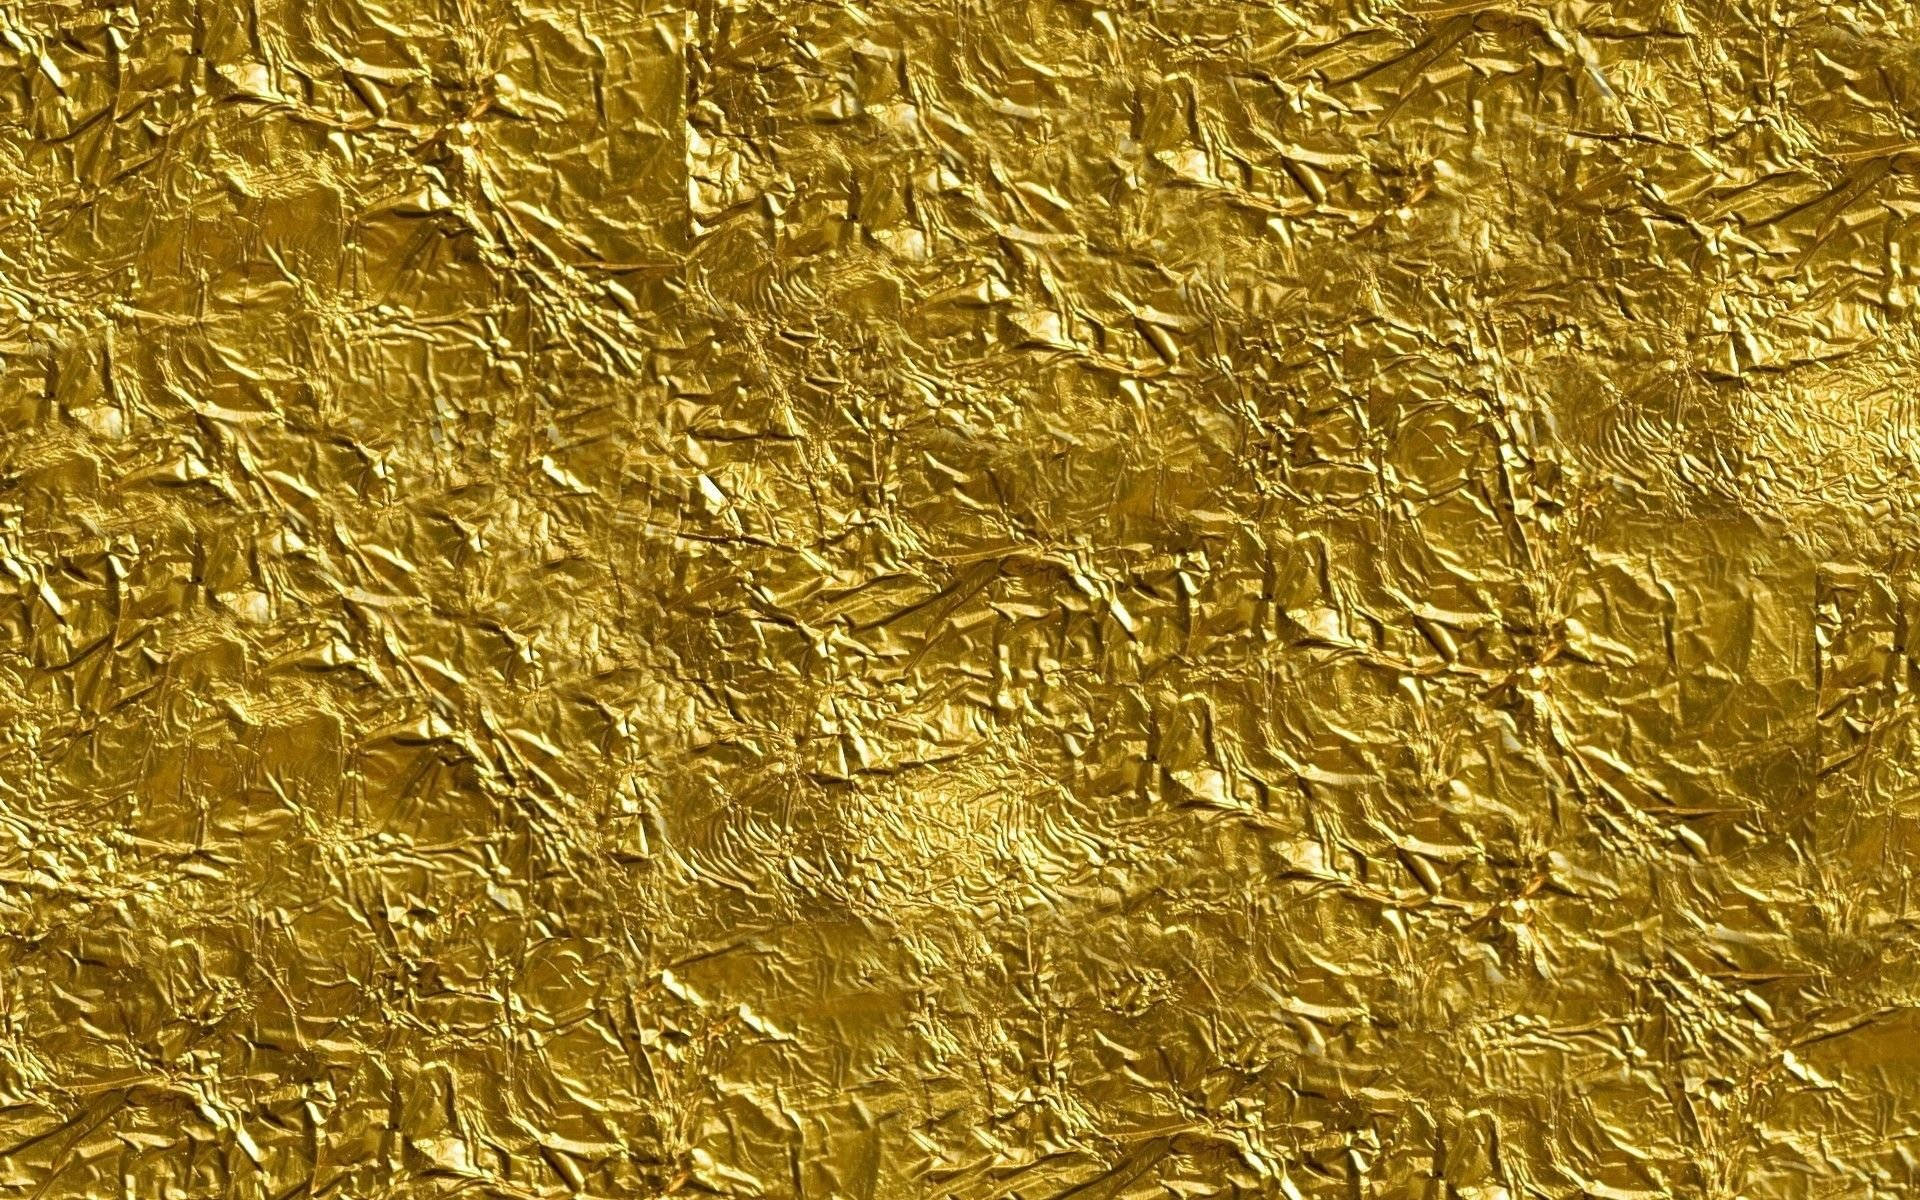 Vibrant Crushed Gold Foil Texture Background